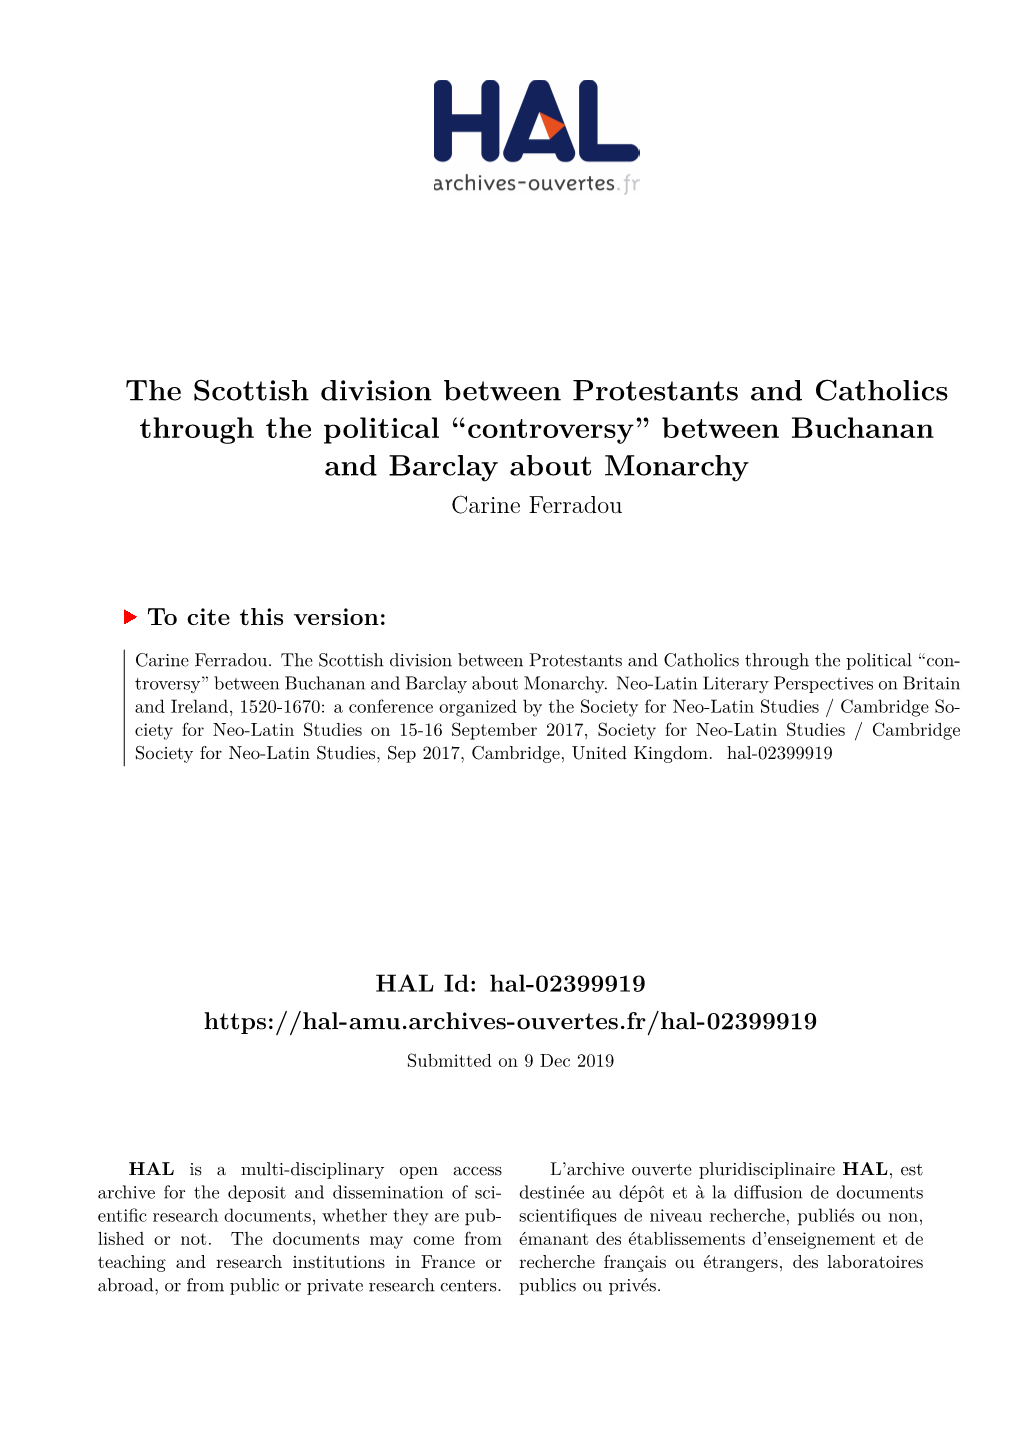 The Scottish Division Between Protestants and Catholics Through the Political “Controversy” Between Buchanan and Barclay About Monarchy Carine Ferradou